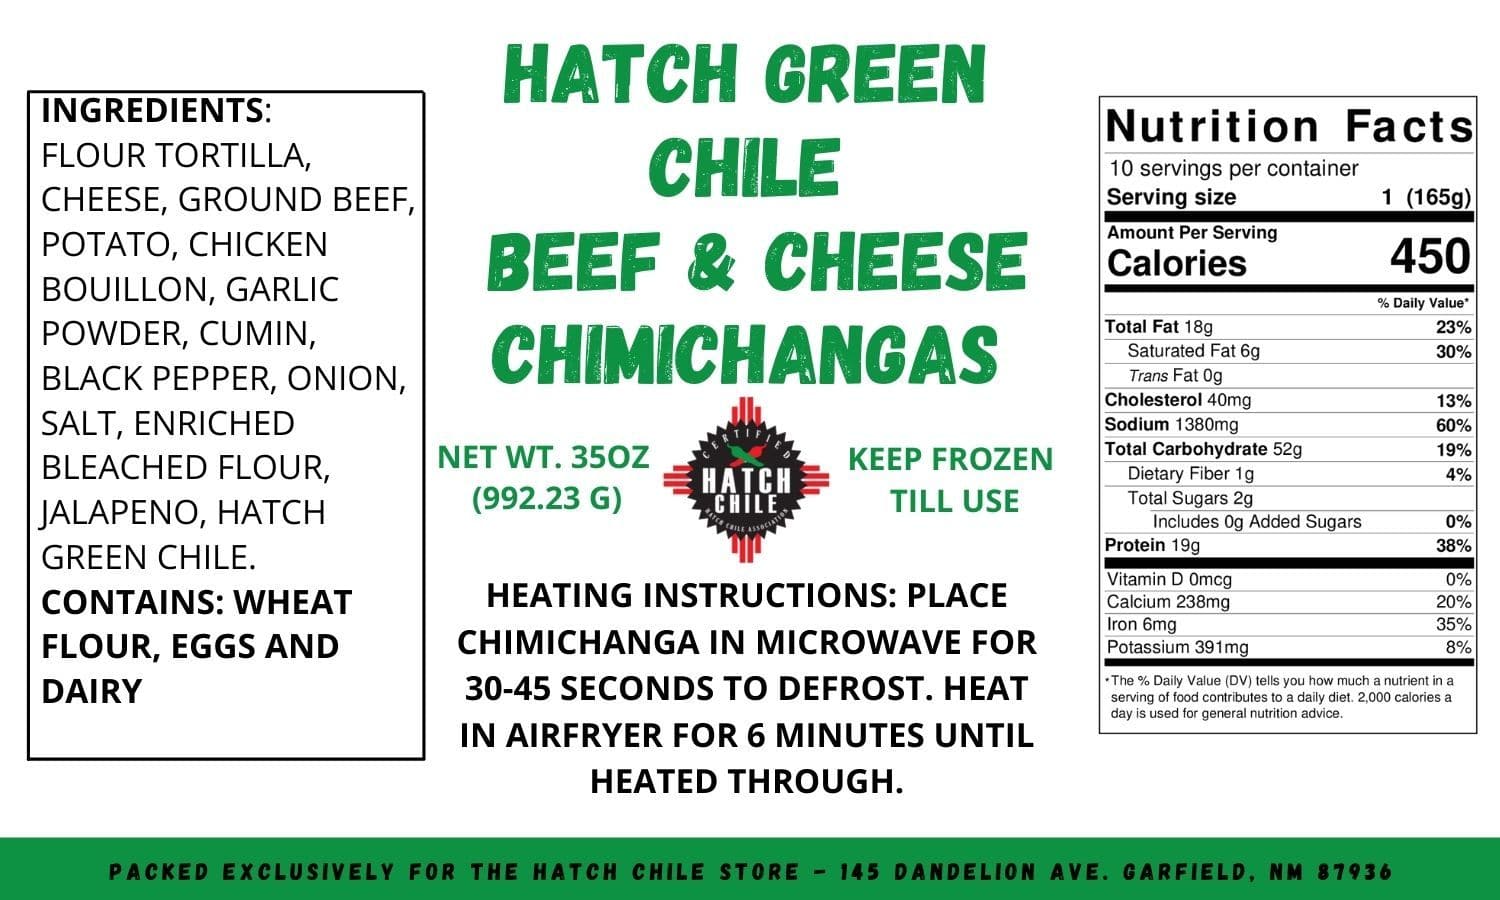 Label of Hatch Green Chile Beef & Cheese Chimichangas showing ingredients, nutrition facts, and cooking instructions, with a green and white color scheme and bold text.